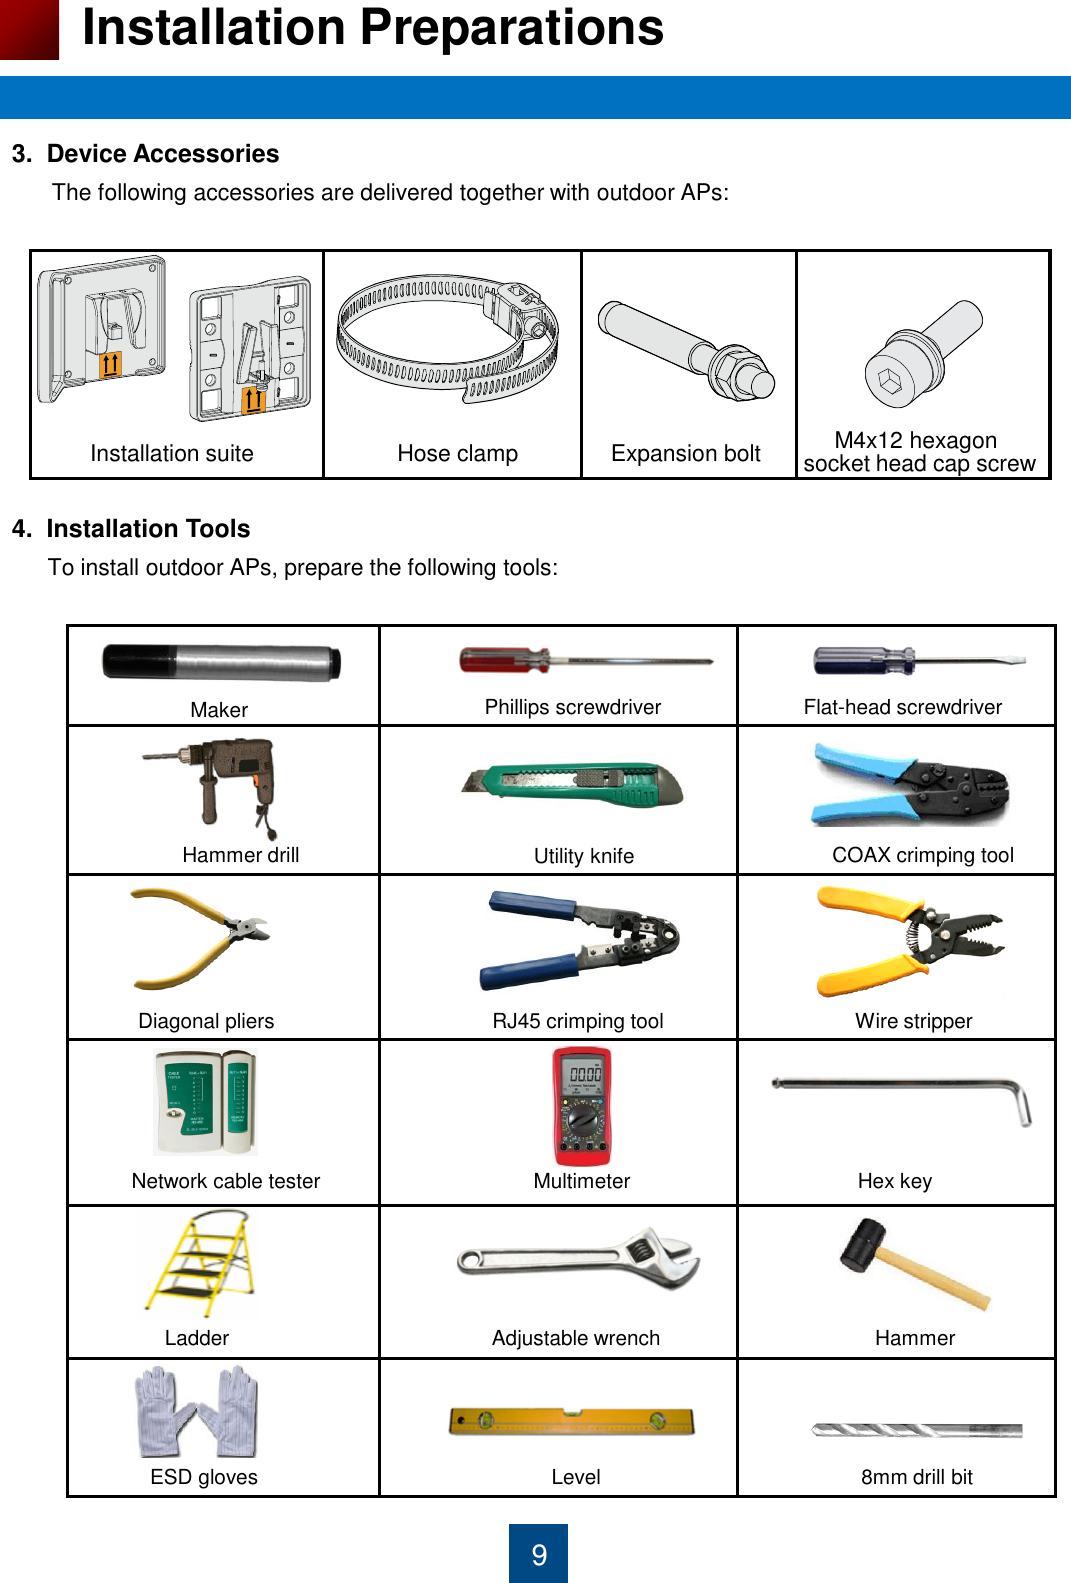 9 Installation Preparations 3.  Device Accessories      The following accessories are delivered together with outdoor APs:       4.  Installation Tools       To install outdoor APs, prepare the following tools:                Phillips screwdriver  Flat-head screwdriver Utility knife Wire stripper Network cable tester  Multimeter Adjustable wrench Maker RJ45 crimping tool Diagonal pliers Ladder COAX crimping tool Hammer drill Hammer ESD gloves  Level  8mm drill bit      M4x12 hexagon  socket head cap screw Installation suite  Hose clamp   Expansion bolt Hex key 